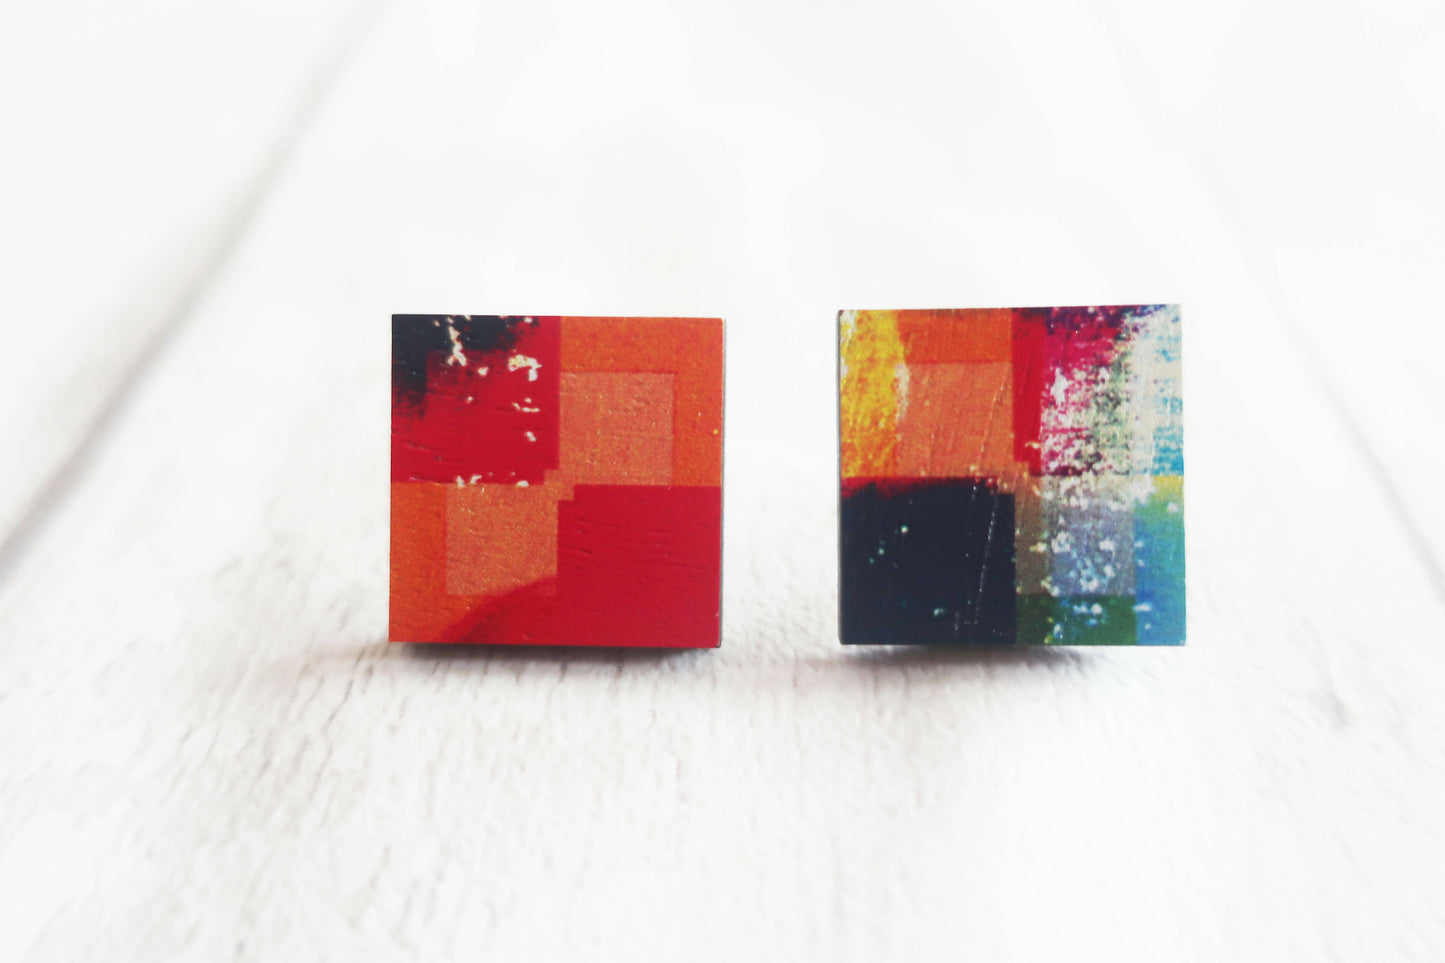 Statement mismatched earrings, abstract modern earrings